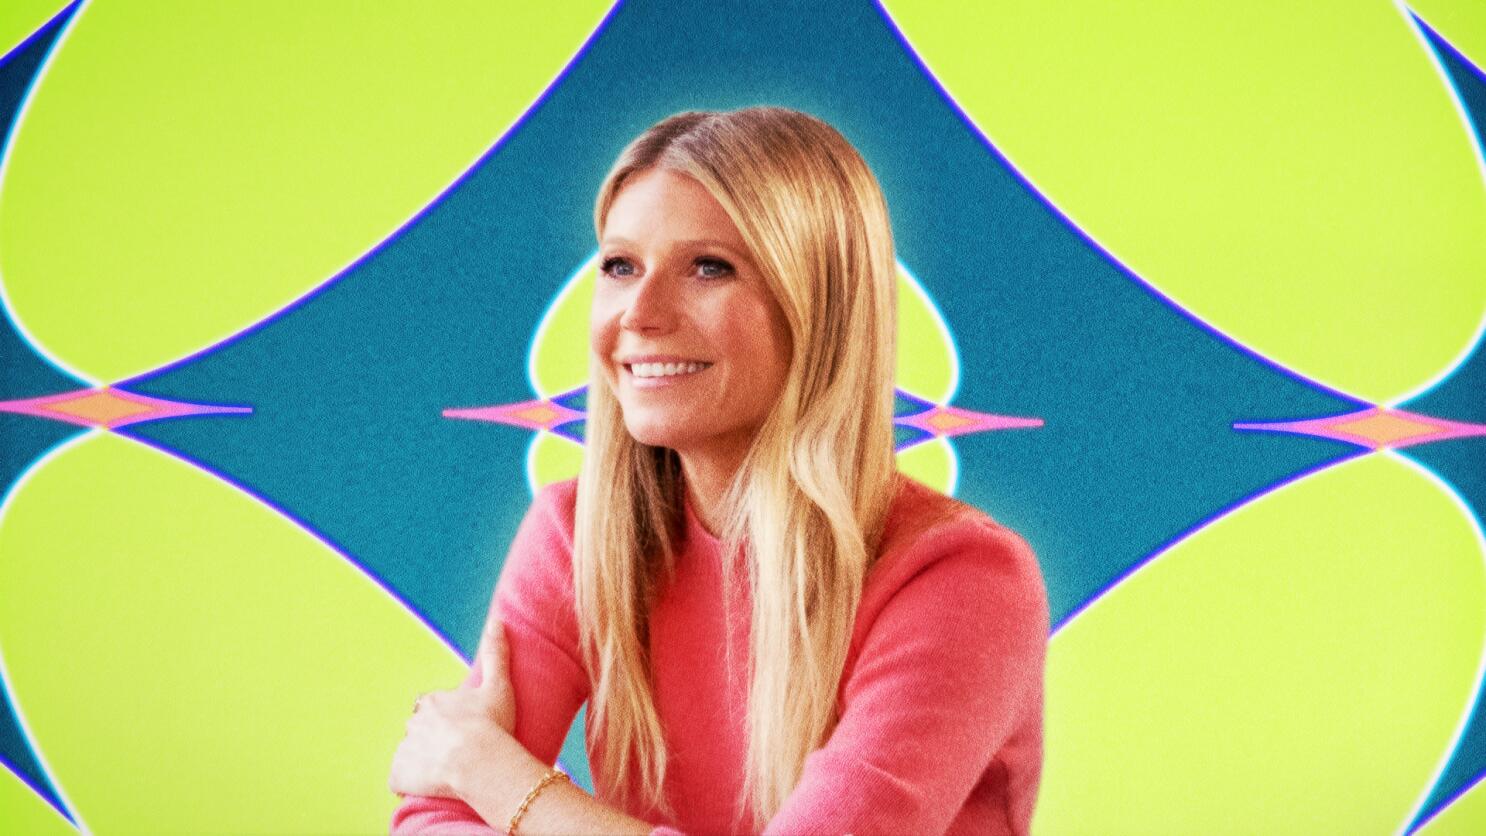 Inside Gwyneth Paltrow's 'immersive' Goop event about menopause